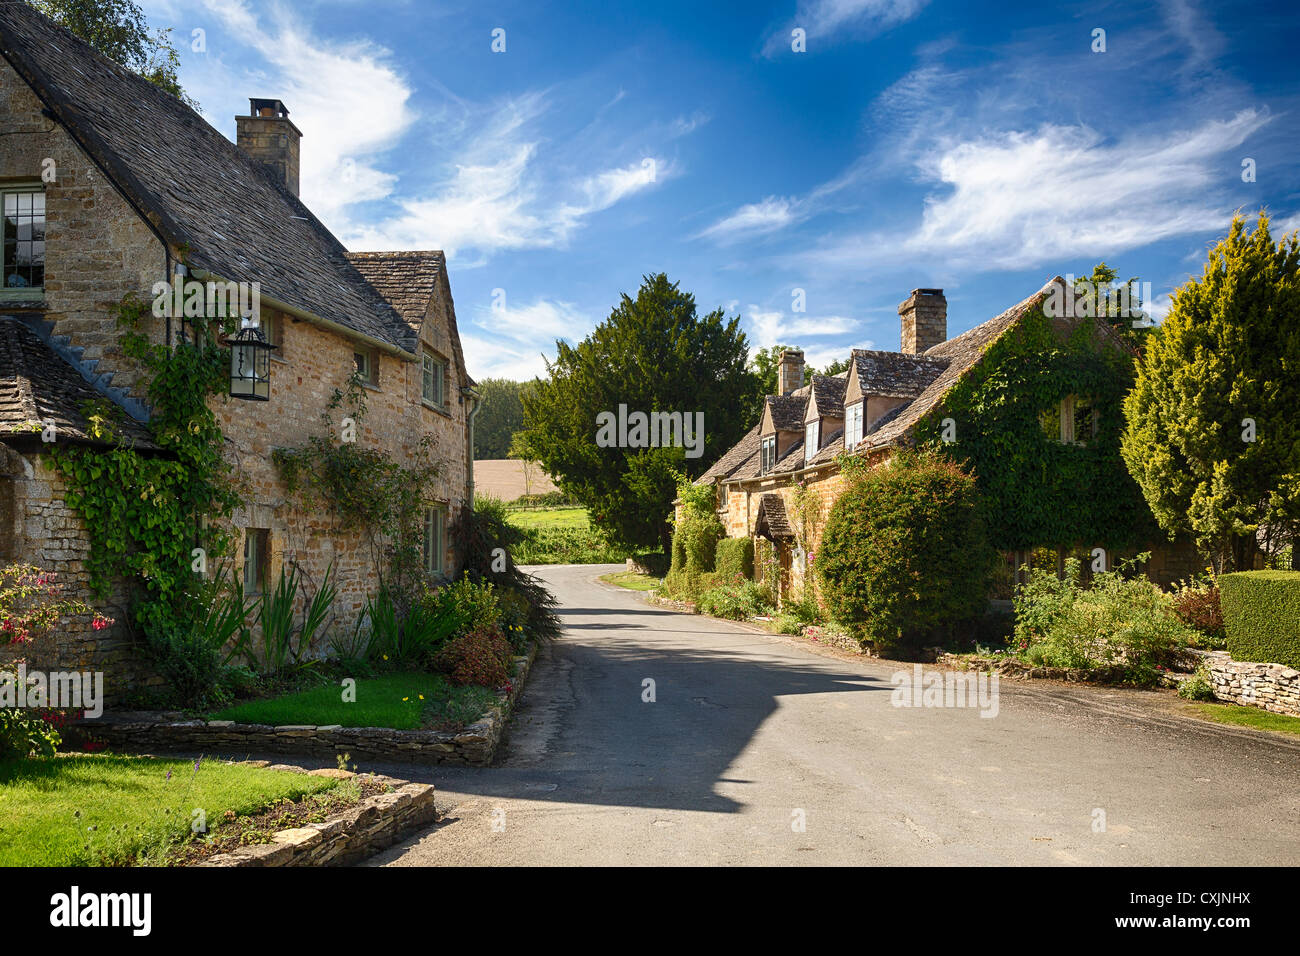 Beautiful old cotswolds stone houses in the pretty old village of Icomb, Gloucestershire, England, UK Stock Photo